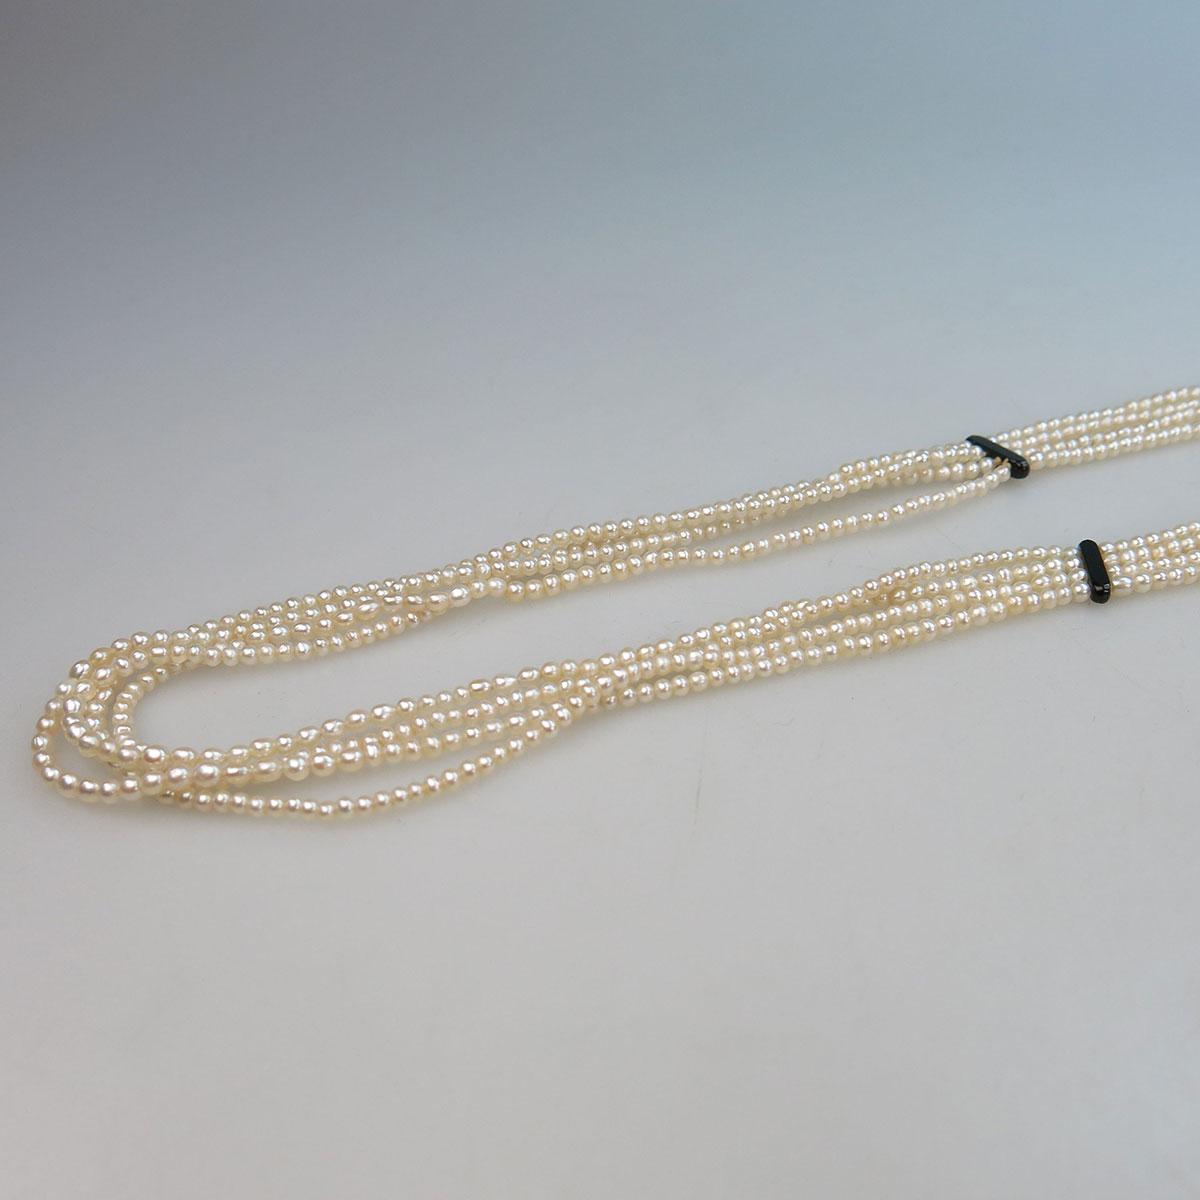 4 Strand Endless Natural Pearl Necklace